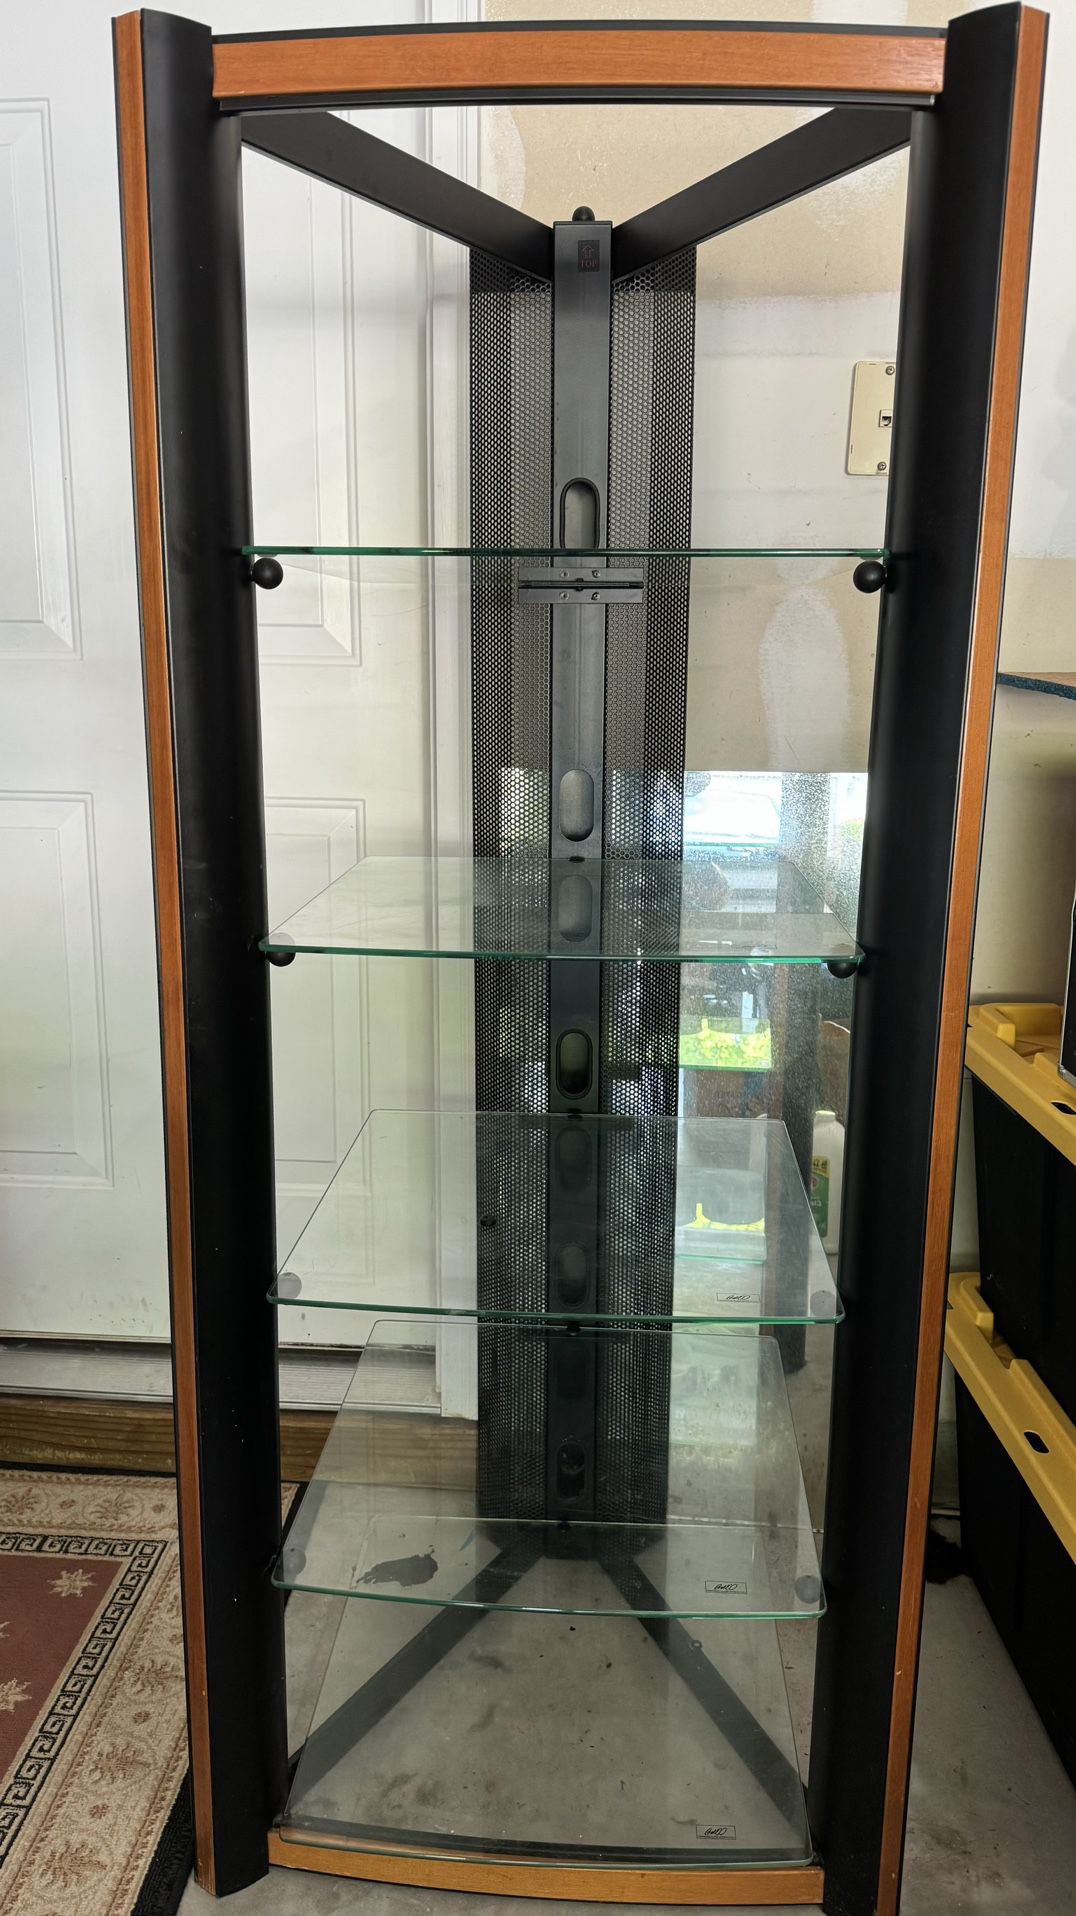 BELL’O Audio Video Tower with 5 Removable Glass Shelving $50 OBO